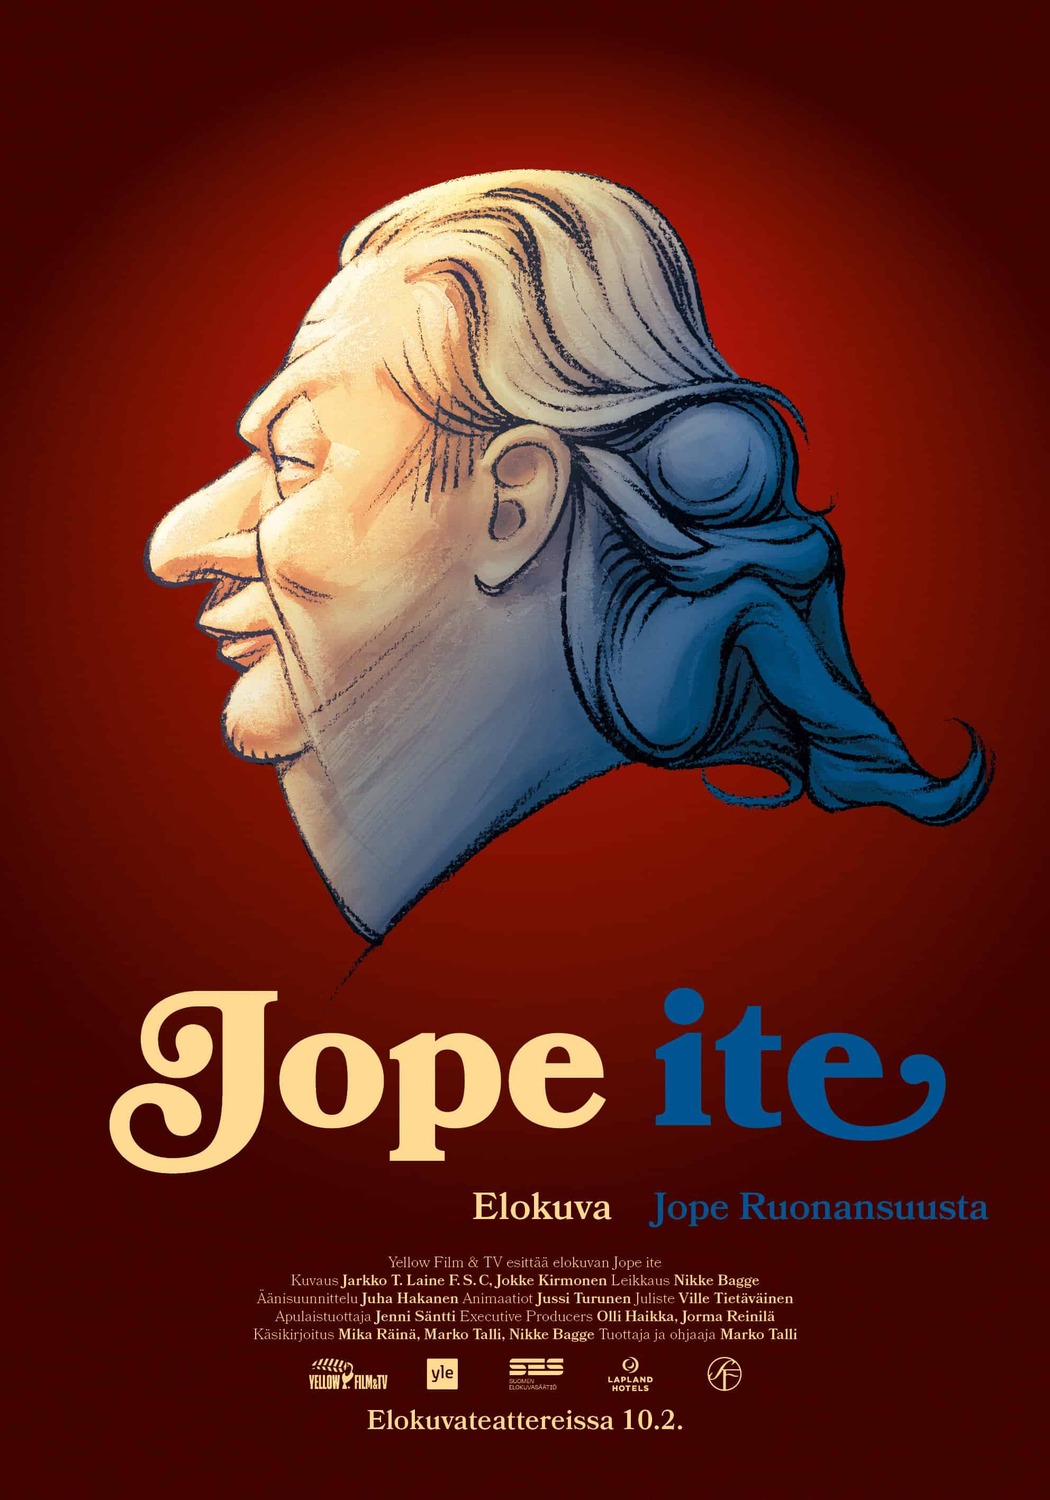 Extra Large Movie Poster Image for Jope ite 